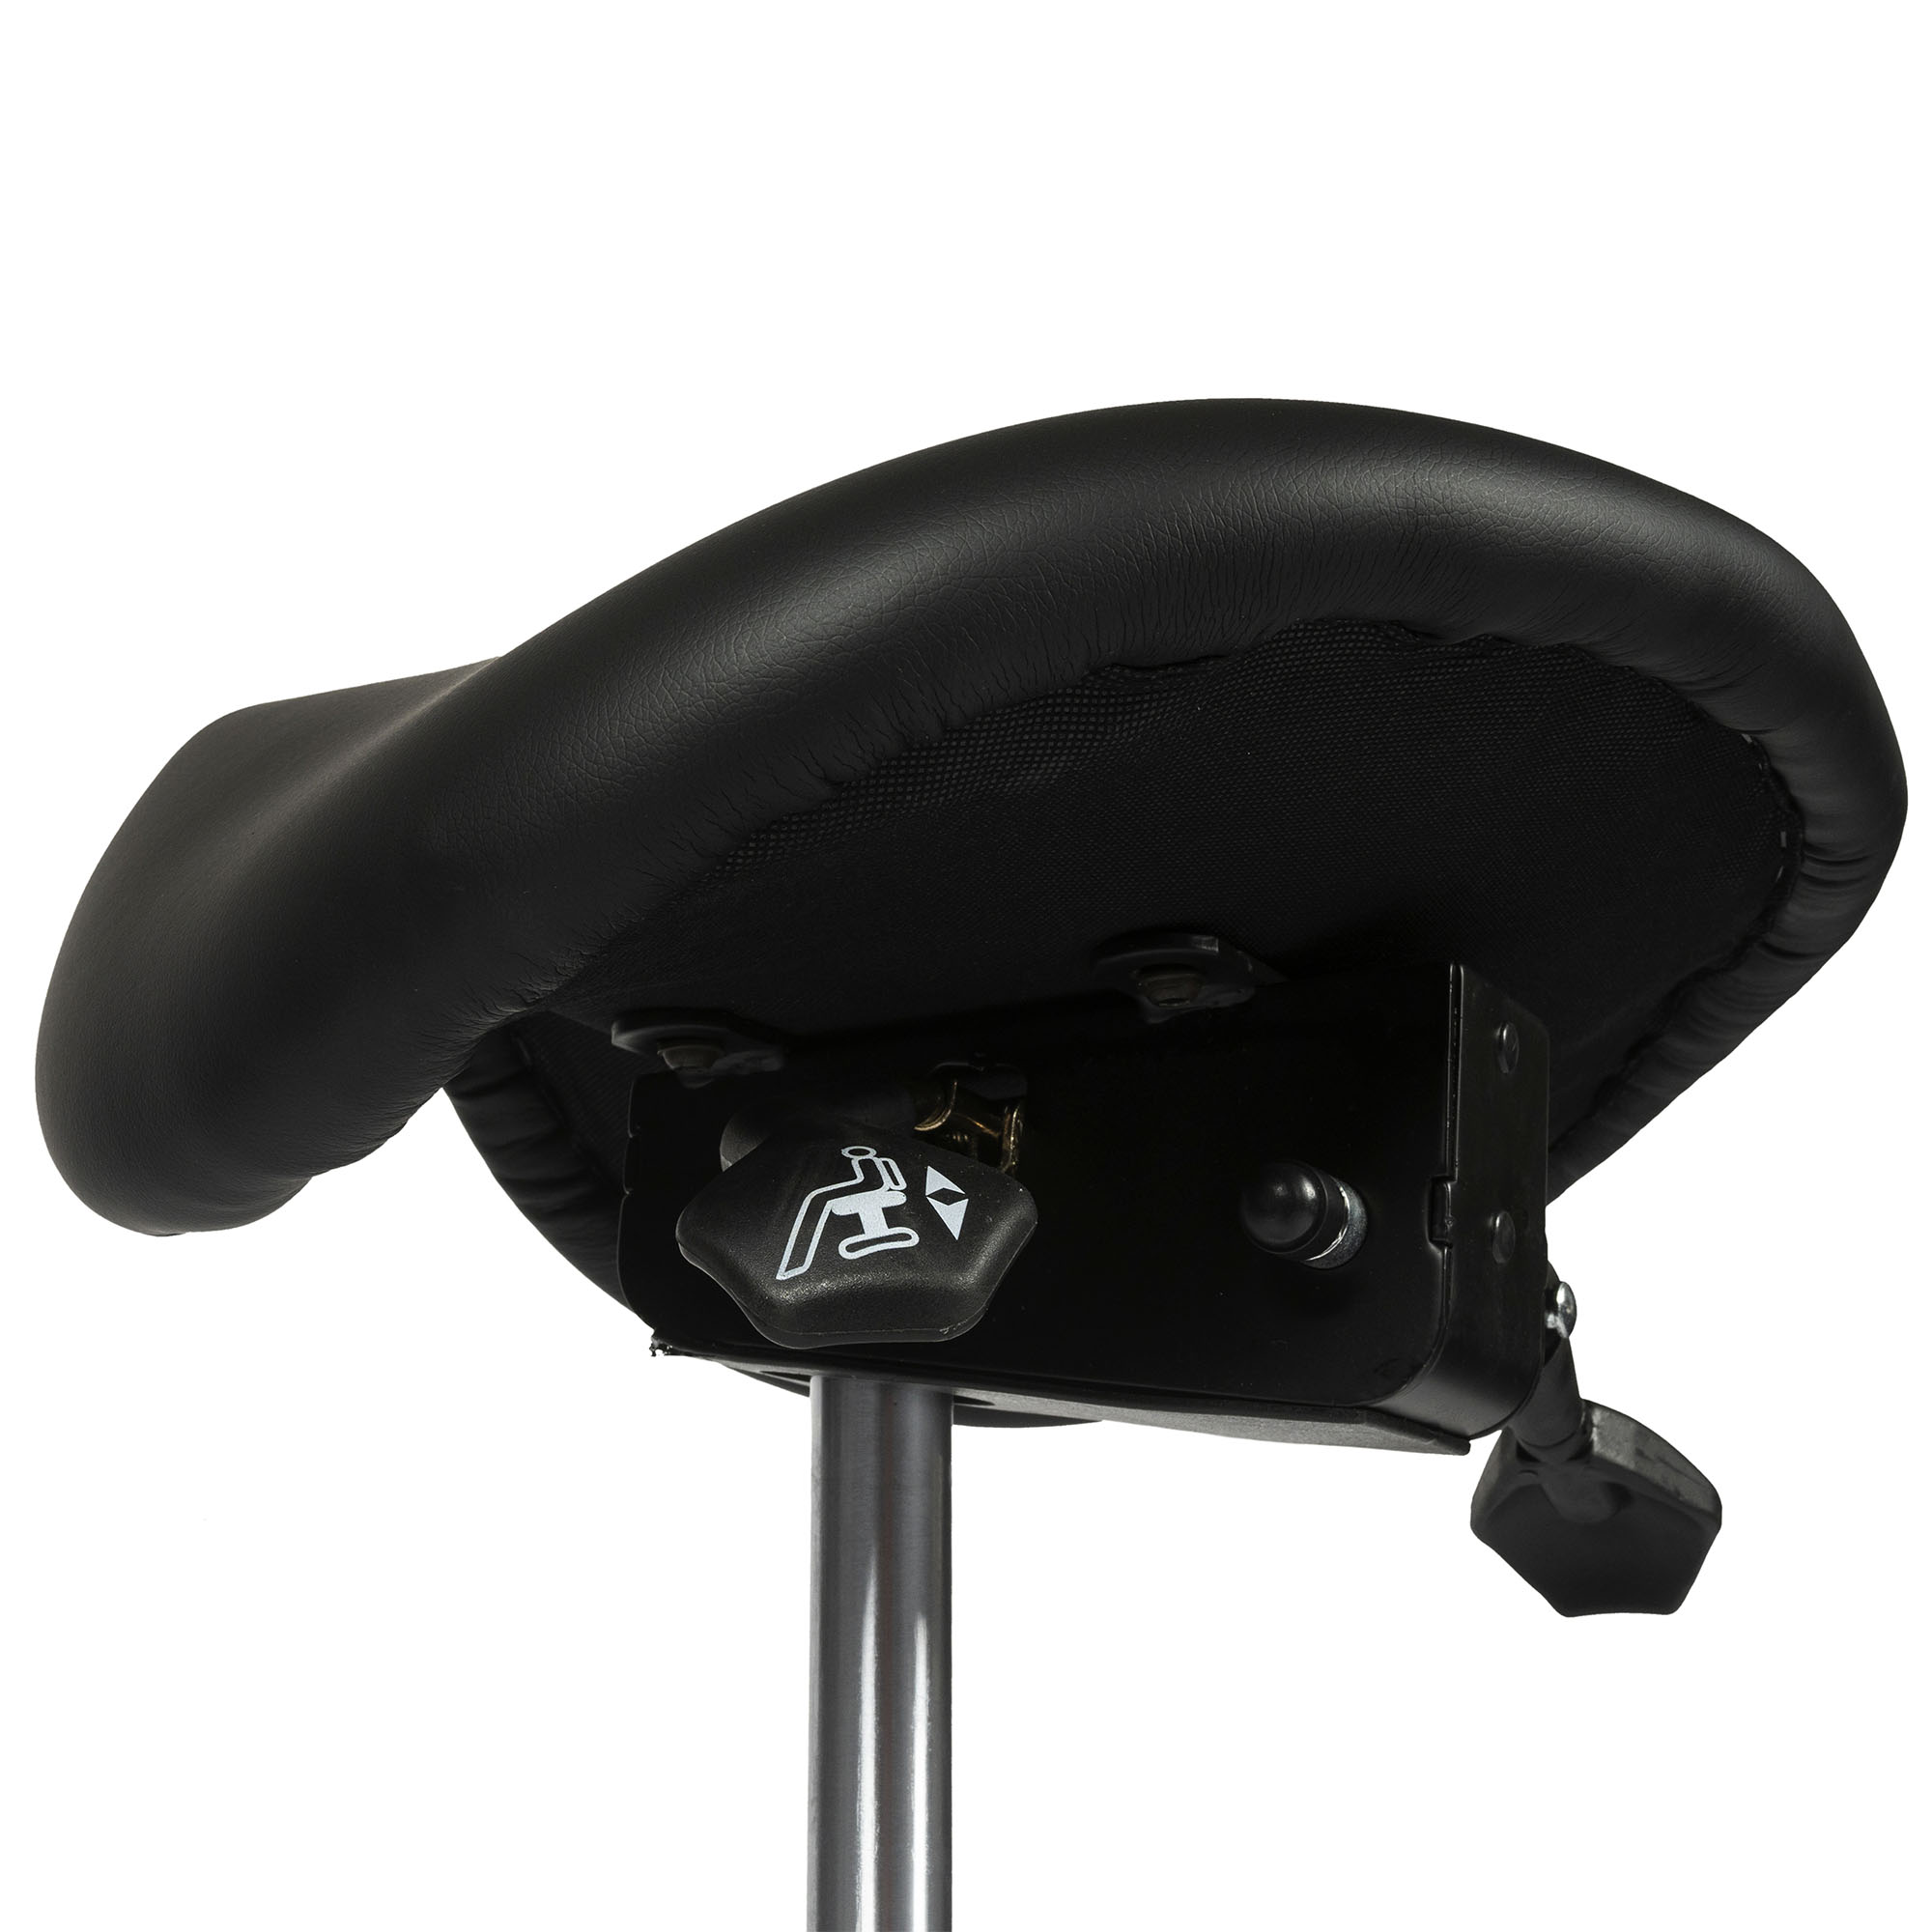 dunimed ergonomic saddle stool with tiltable seat adjustment handle zoomed in